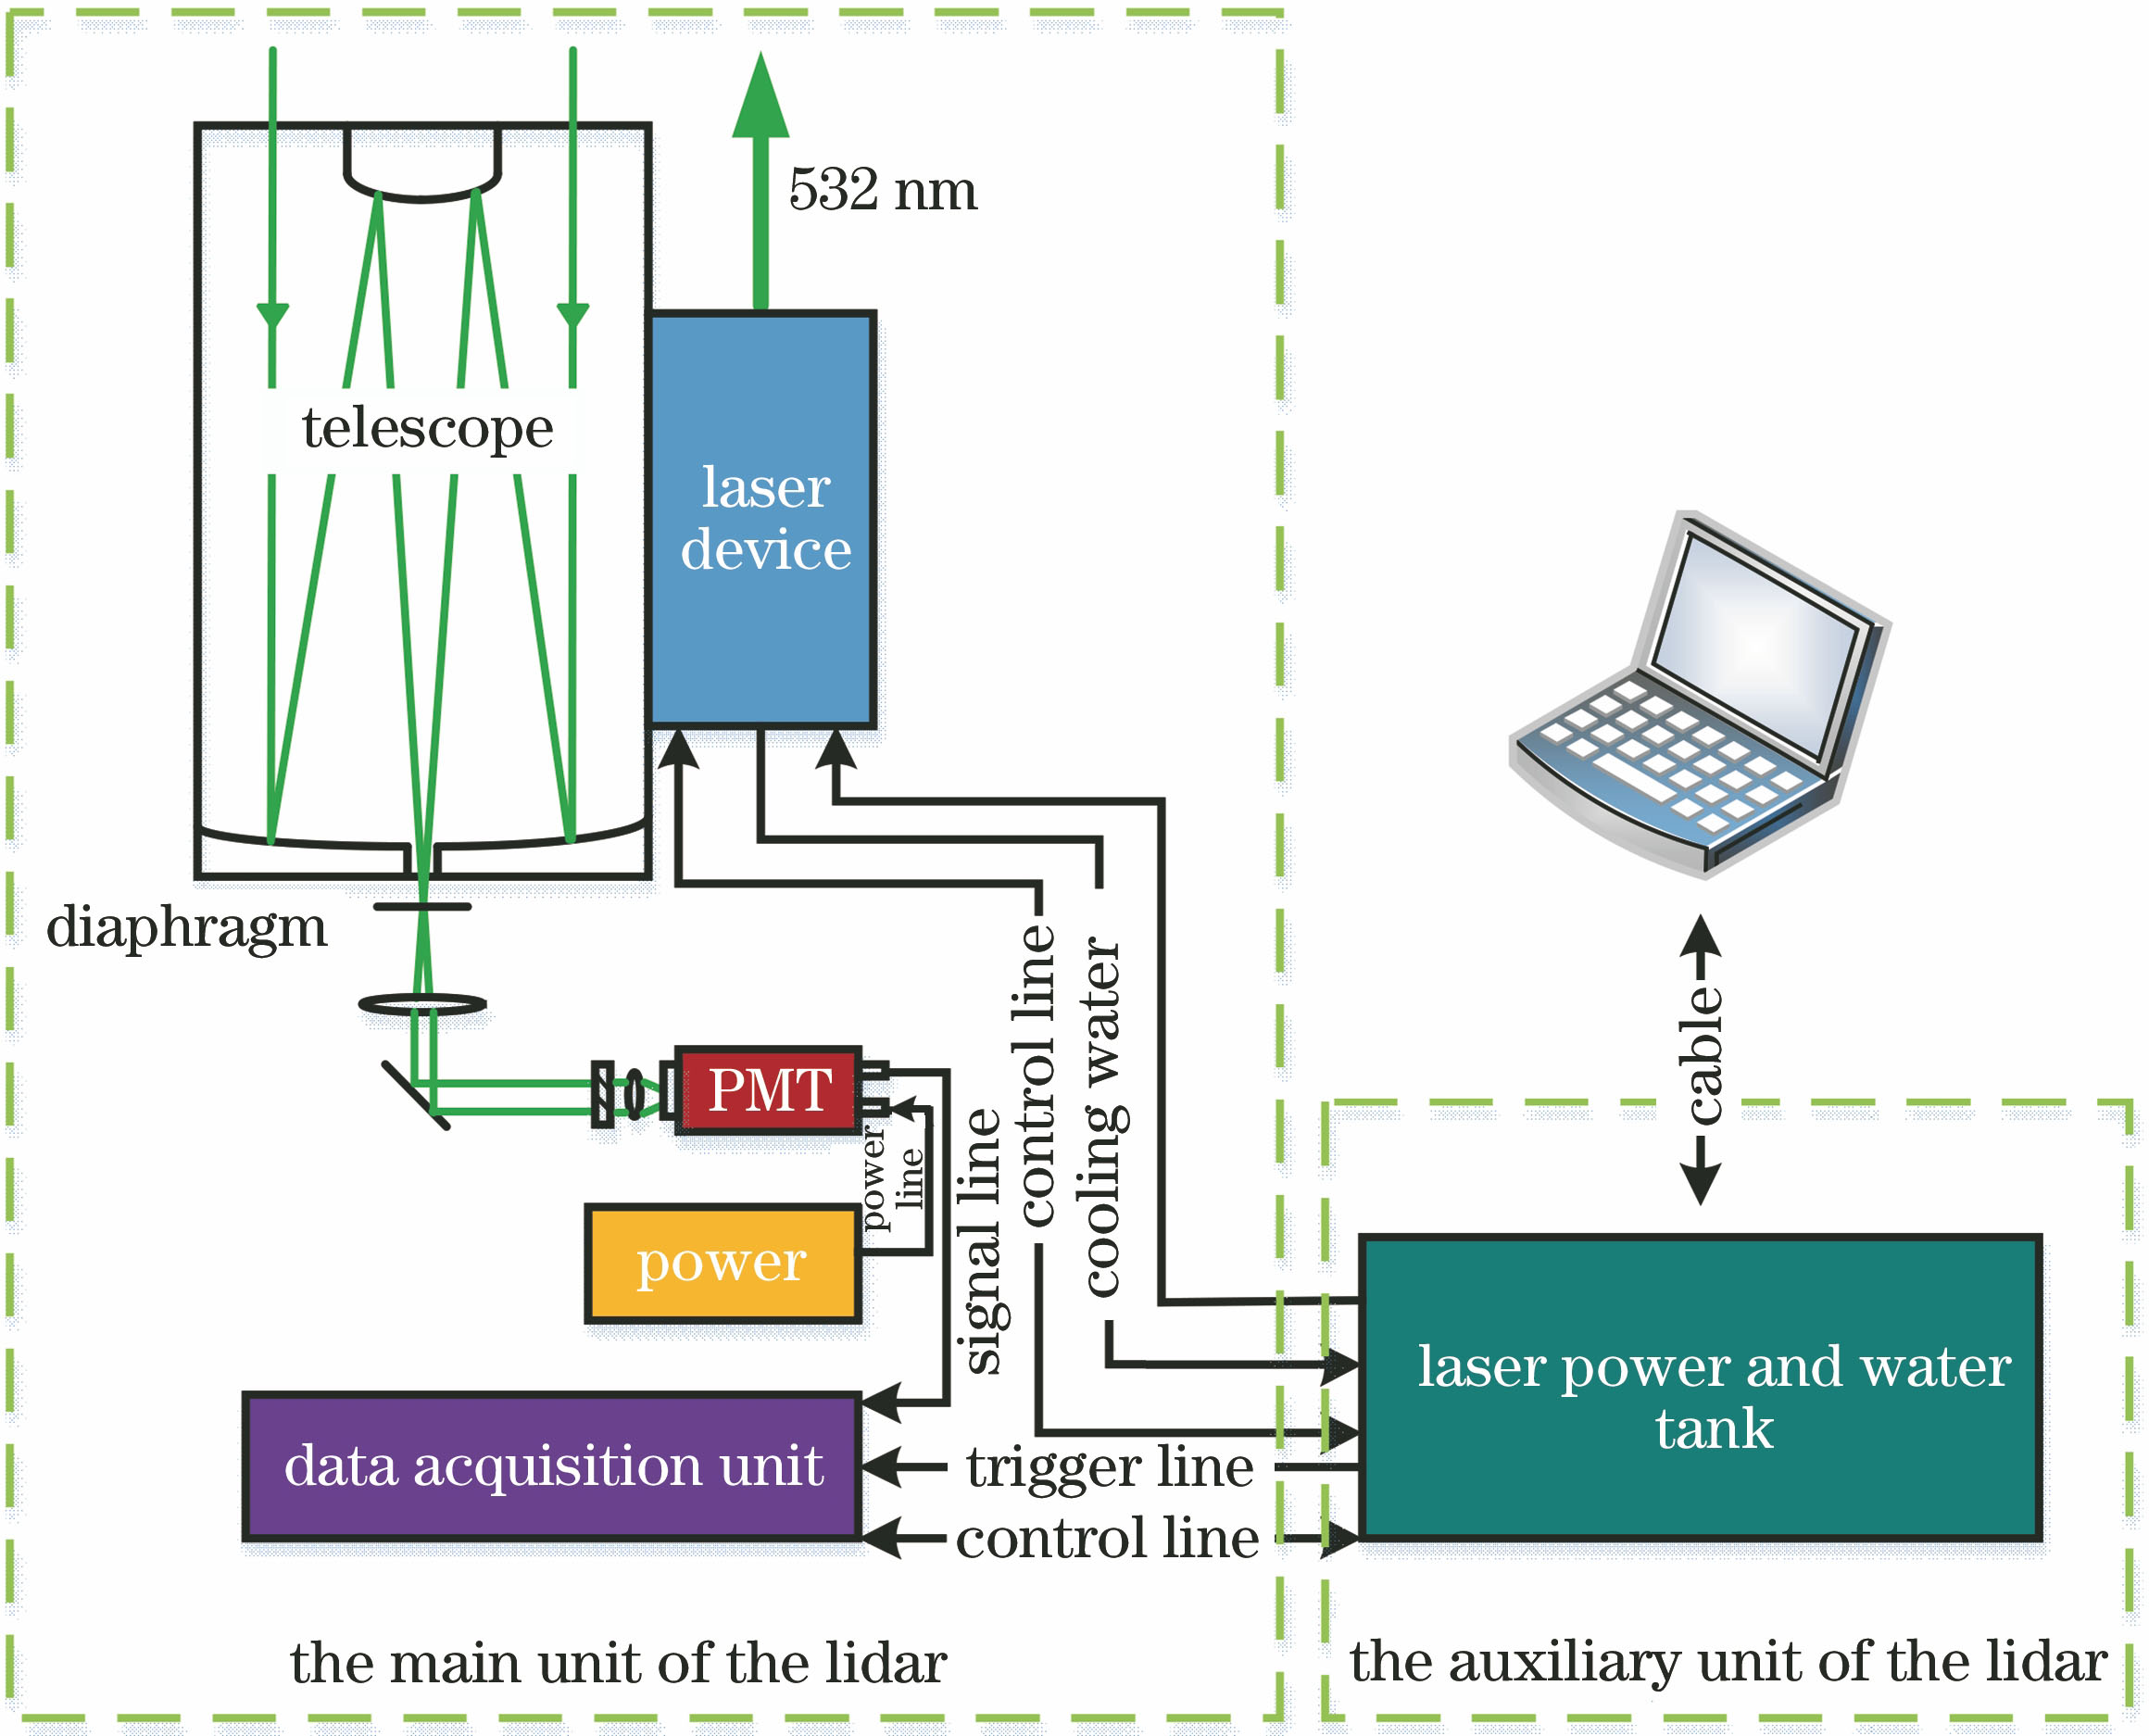 Schematic diagram of the lidar system